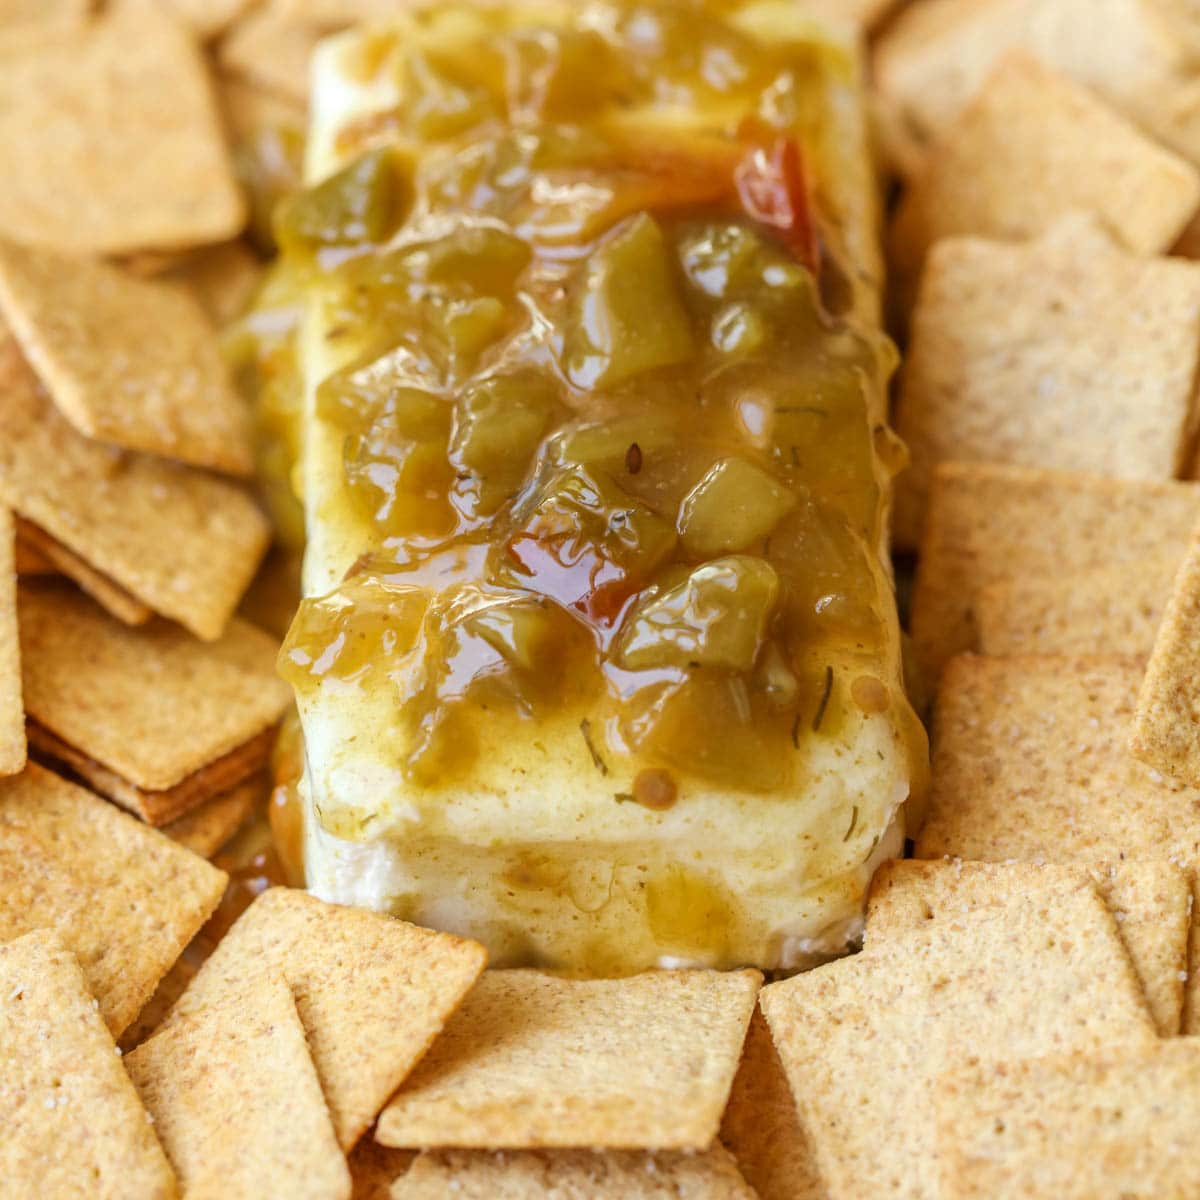 Cream cheese green chili dip with wheat thins